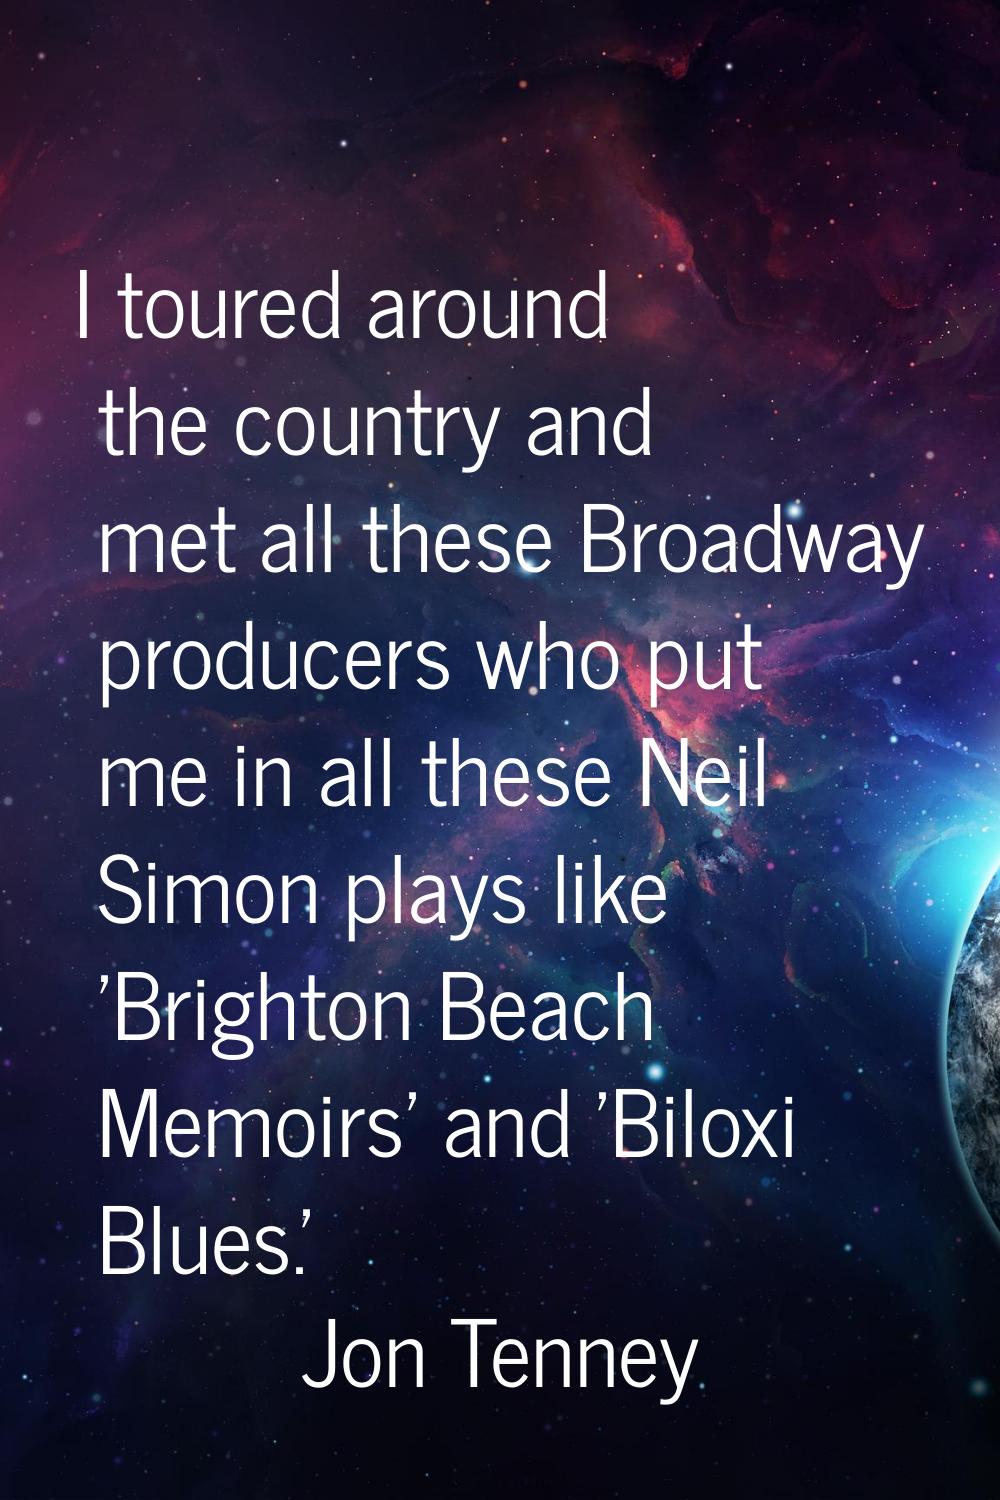 I toured around the country and met all these Broadway producers who put me in all these Neil Simon